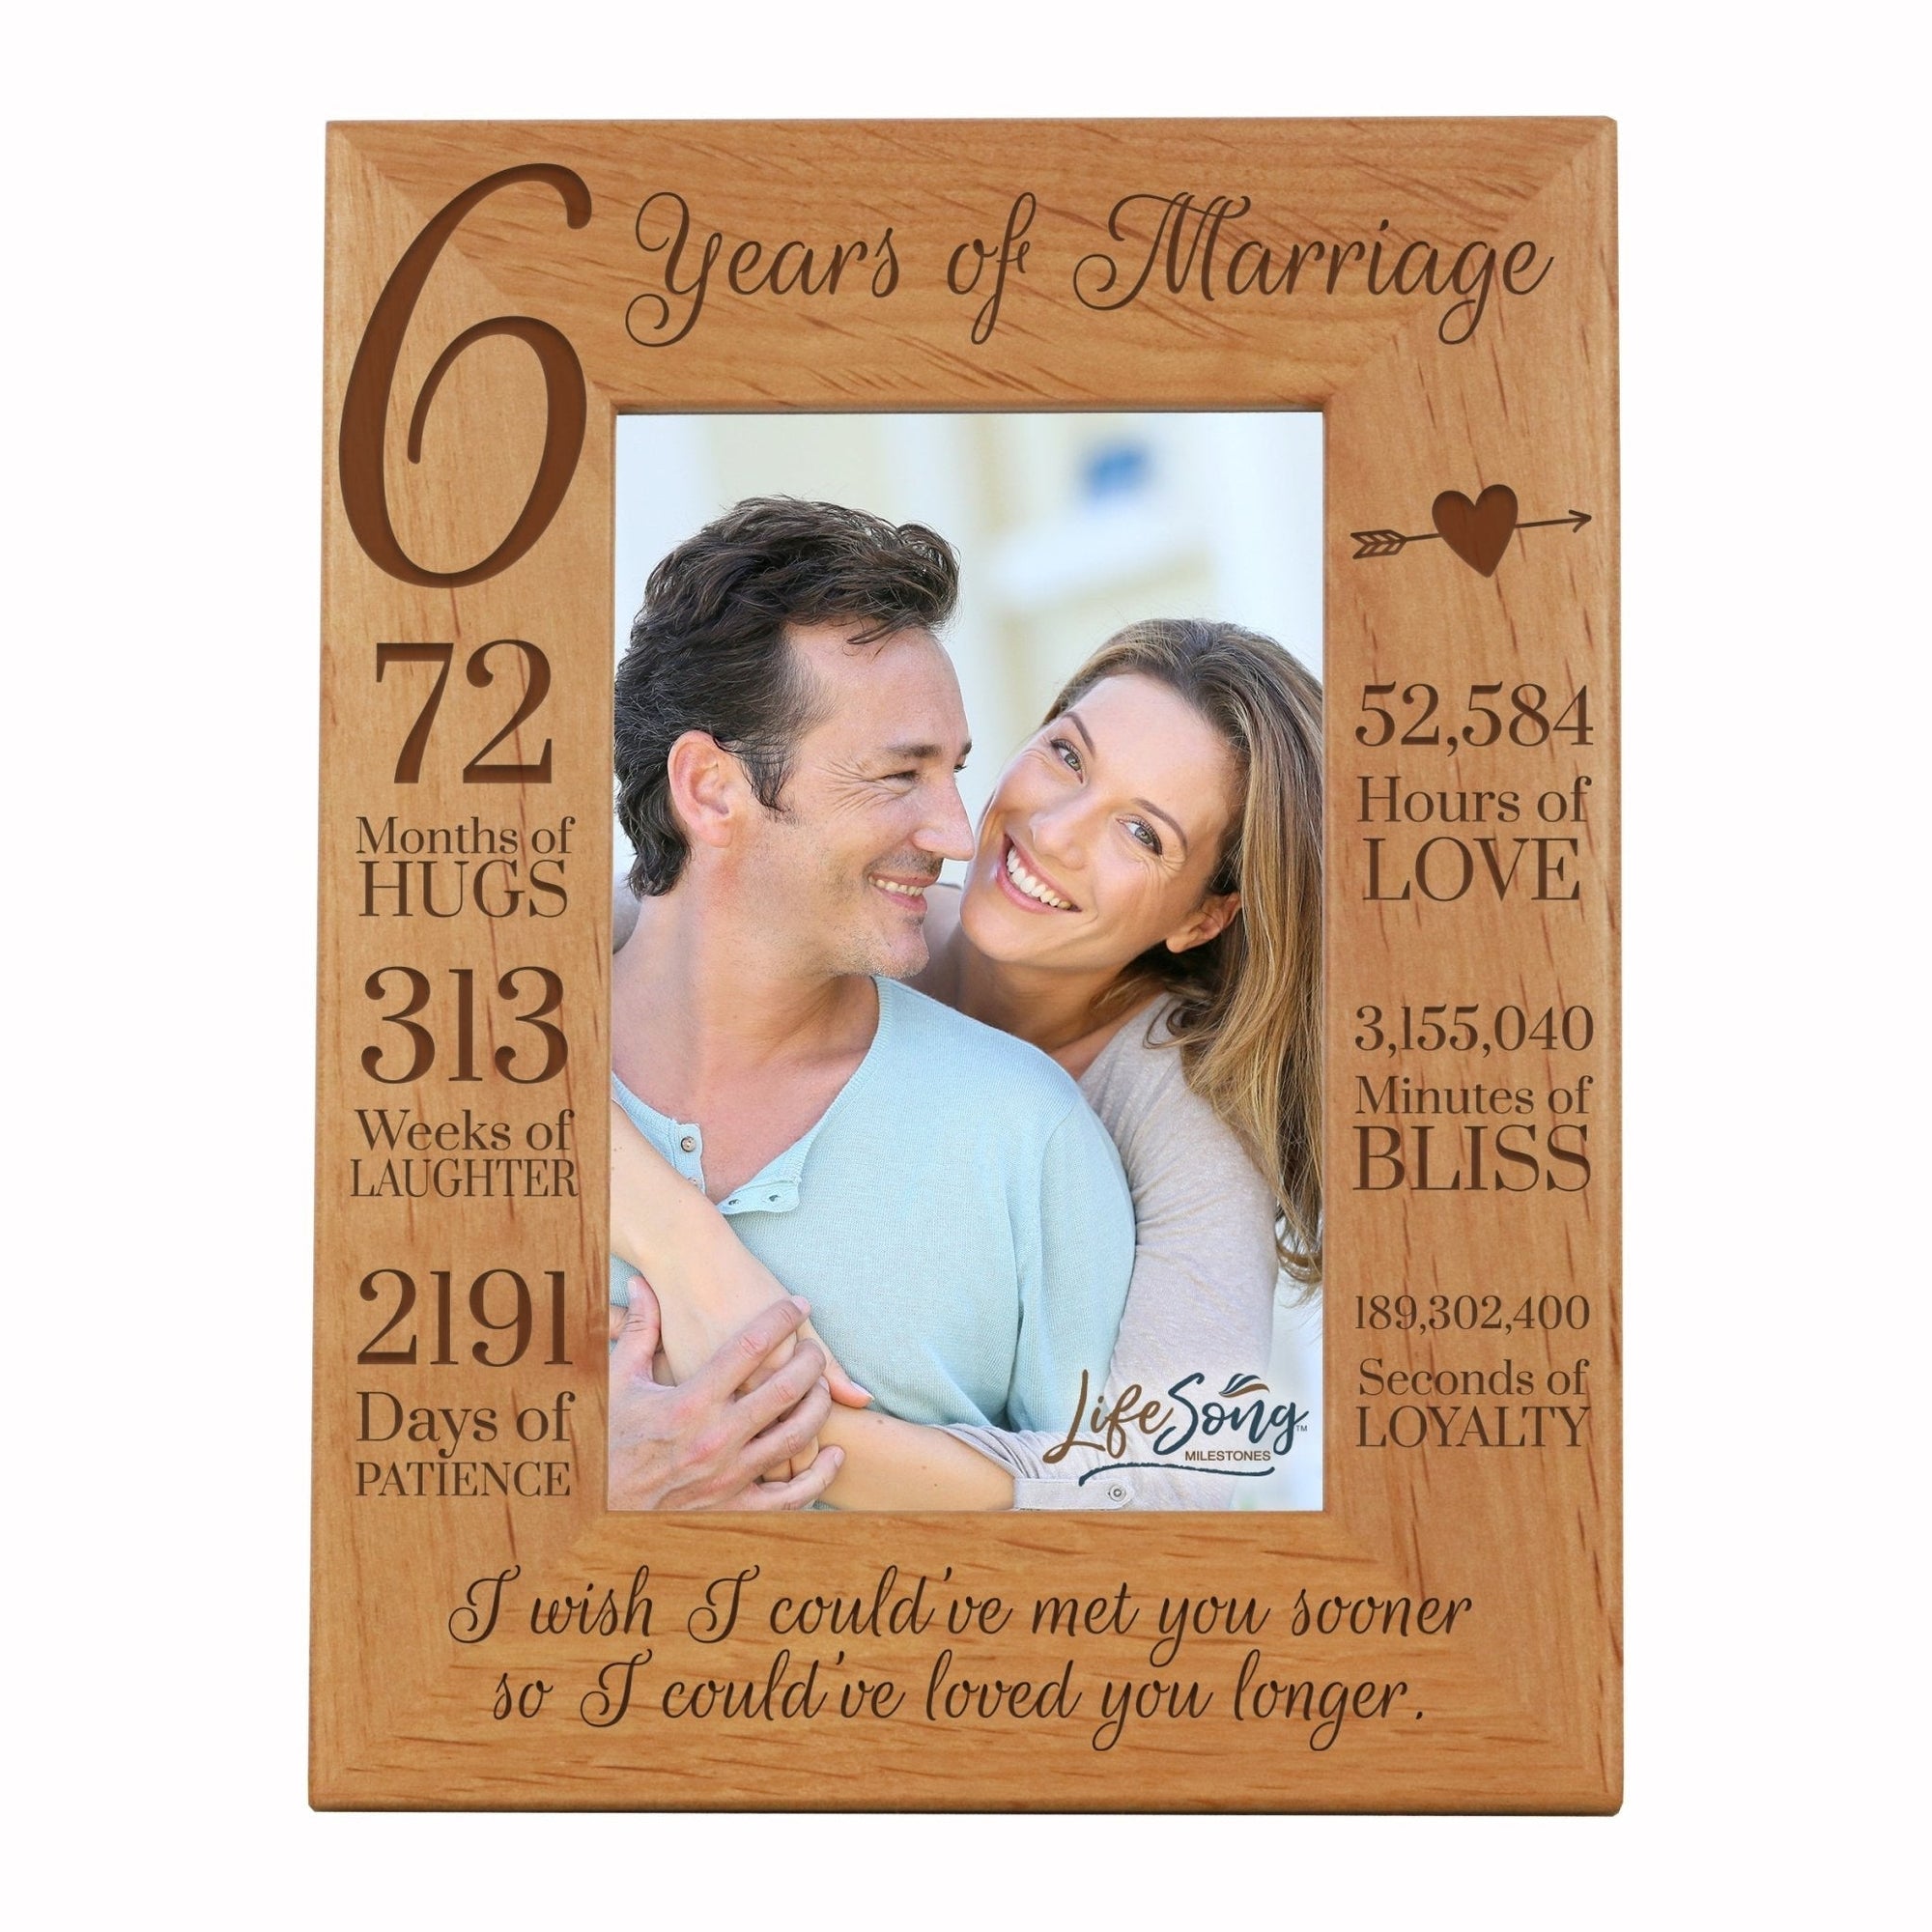 Engraved 6th Wedding Anniversary Photo Frame Wall Decor Gift for Couples - Loved You Longer - LifeSong Milestones